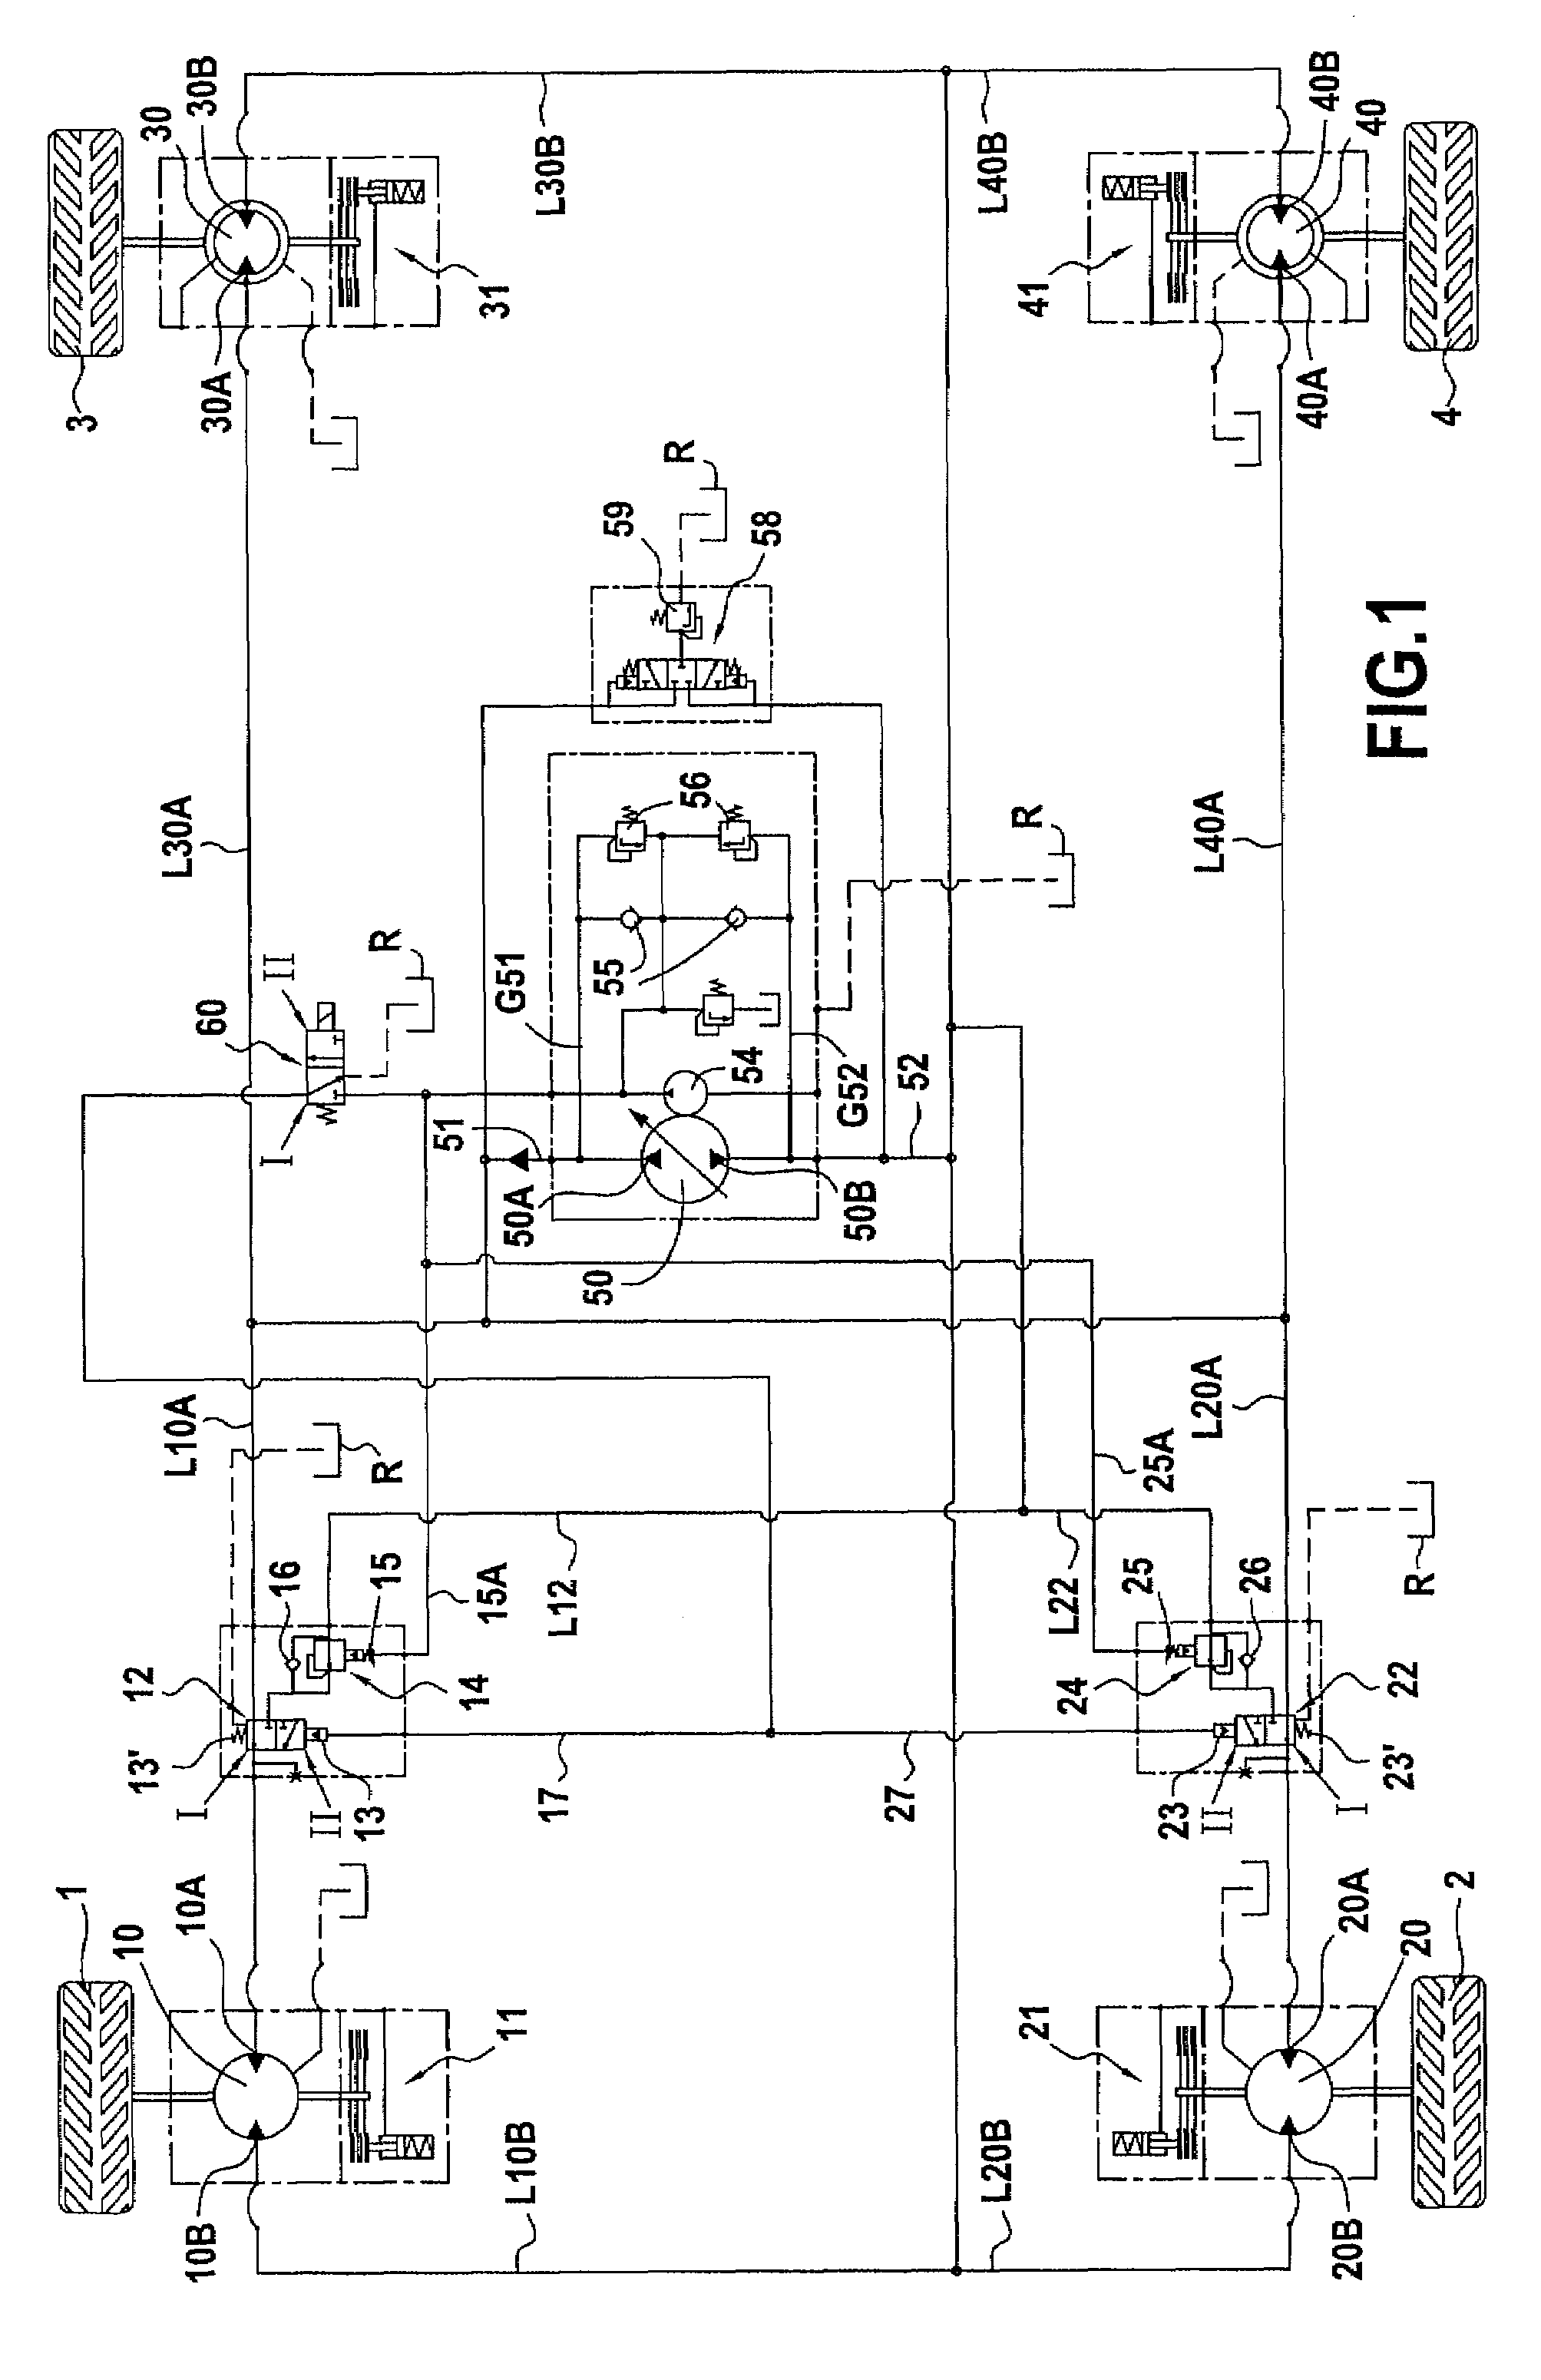 Hydrostatic transmission device for a heavy vehicle